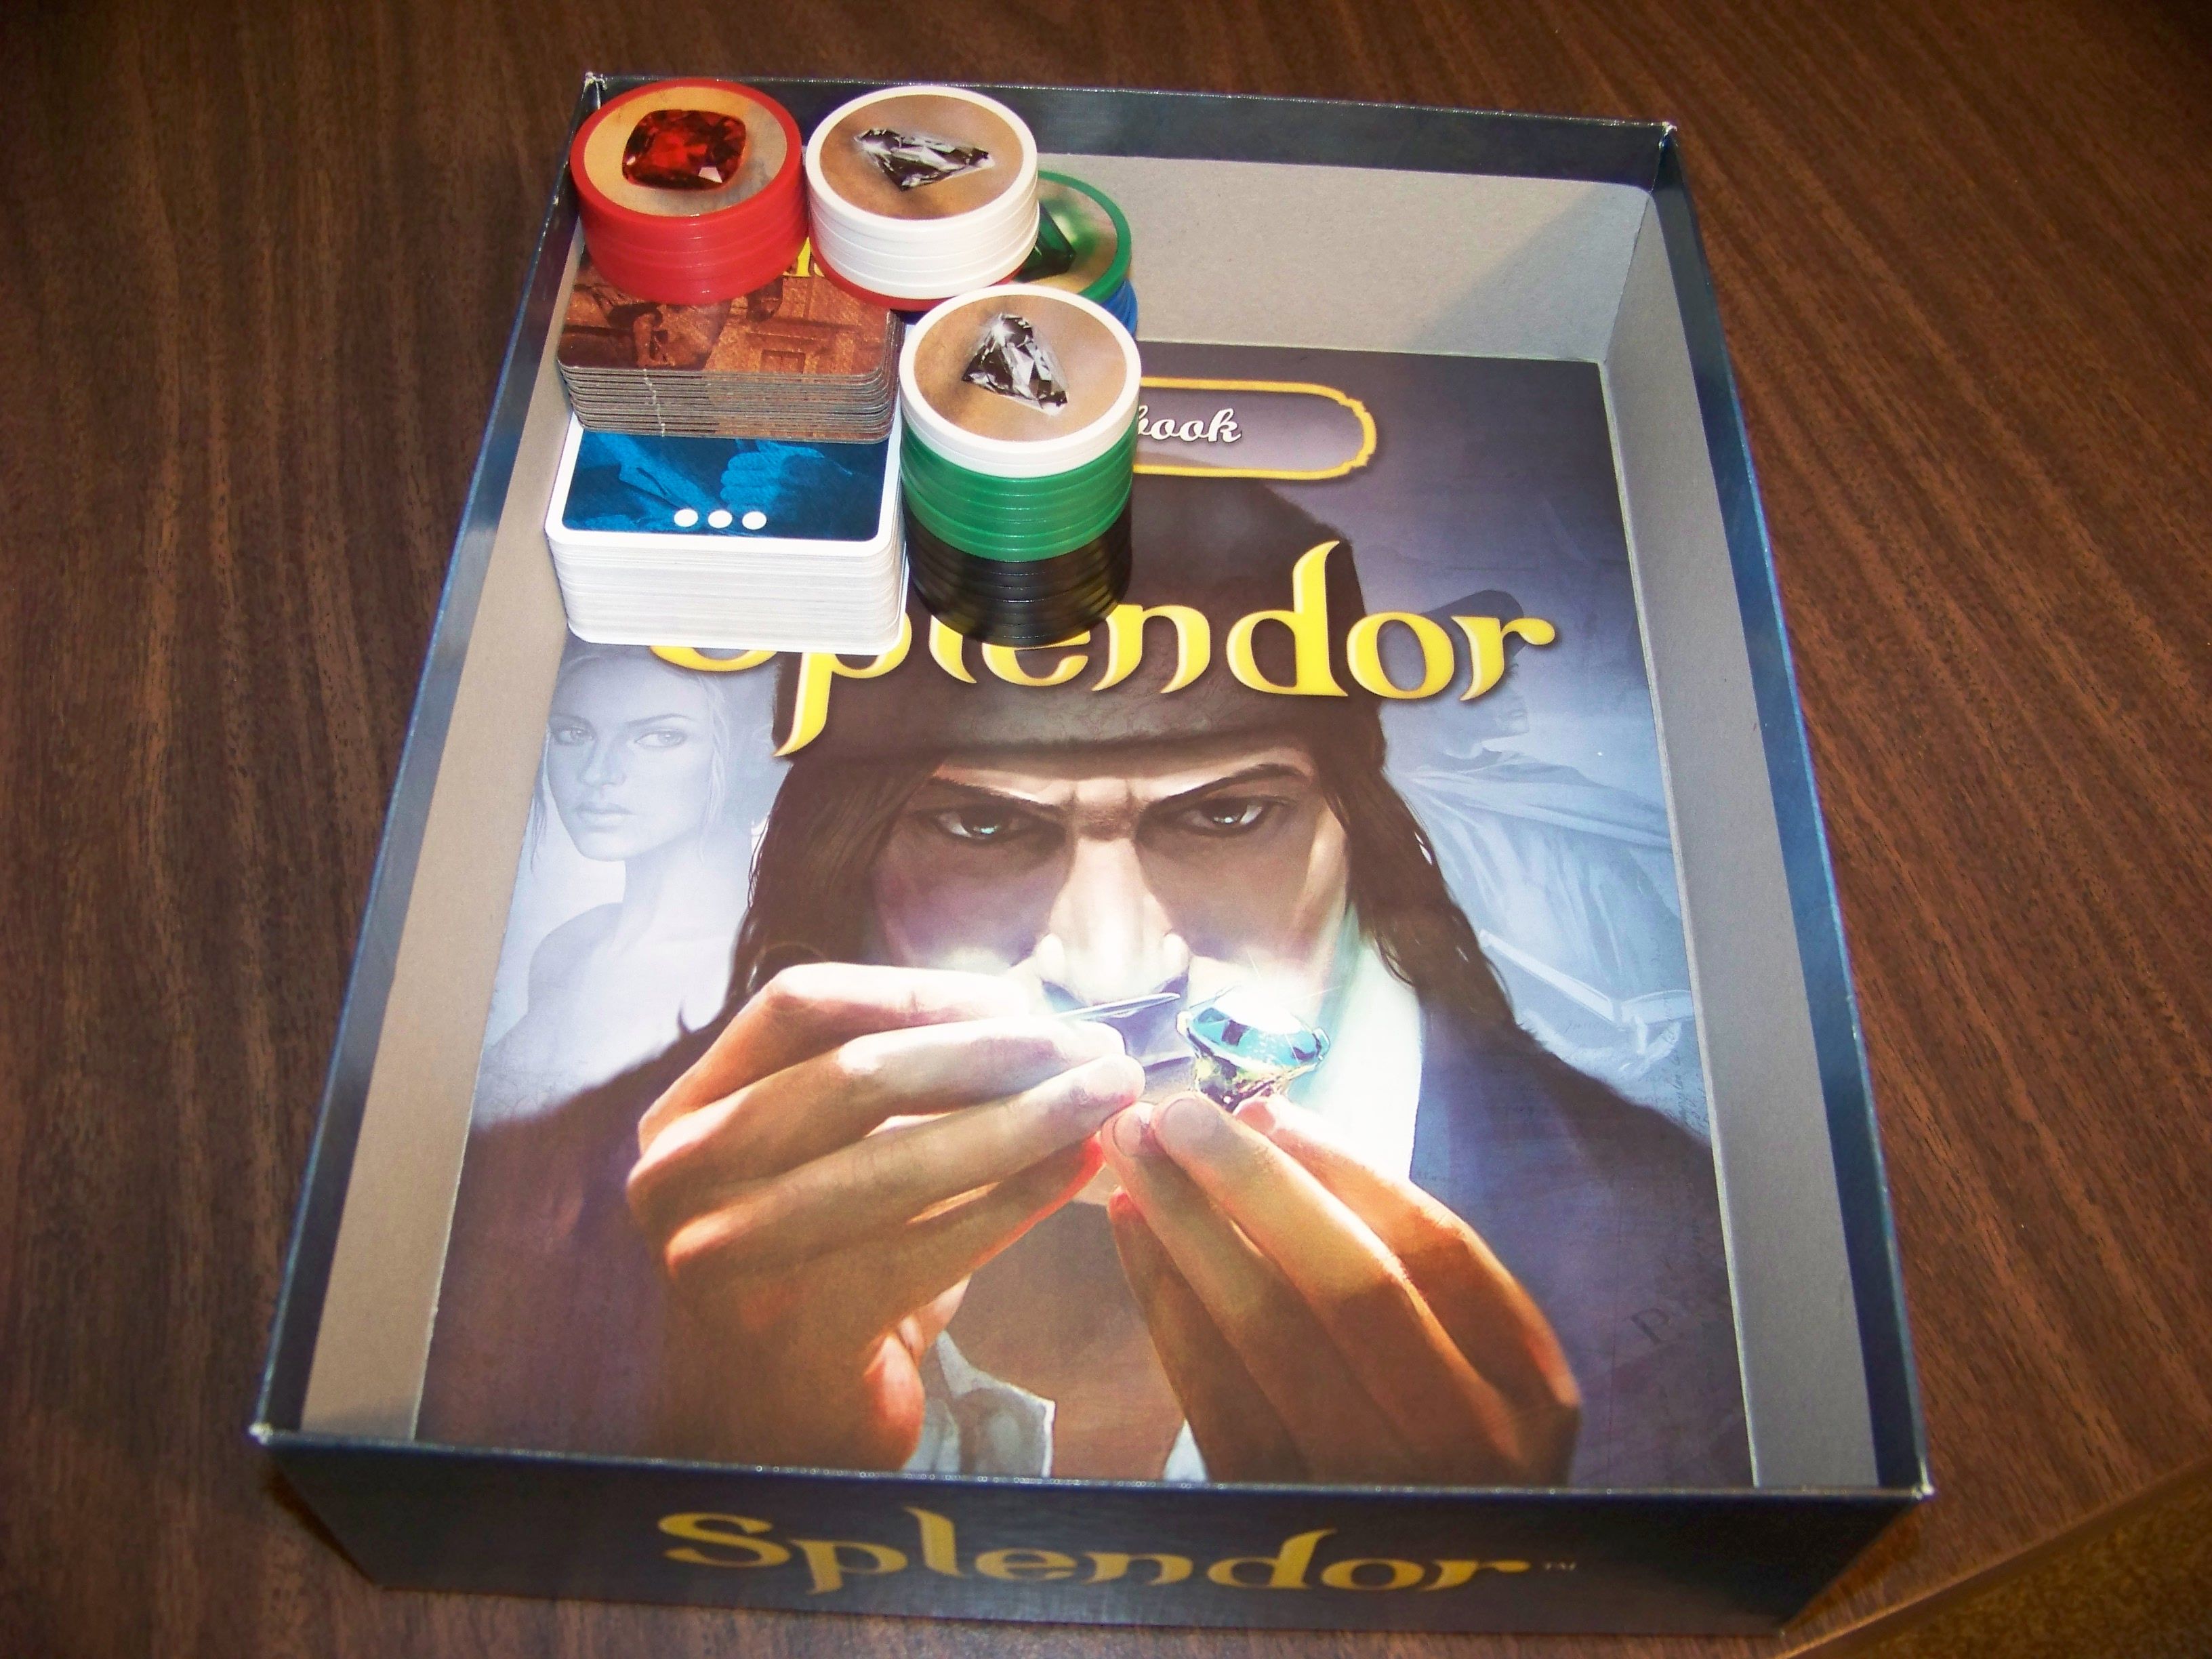 Splendor Wasted Space